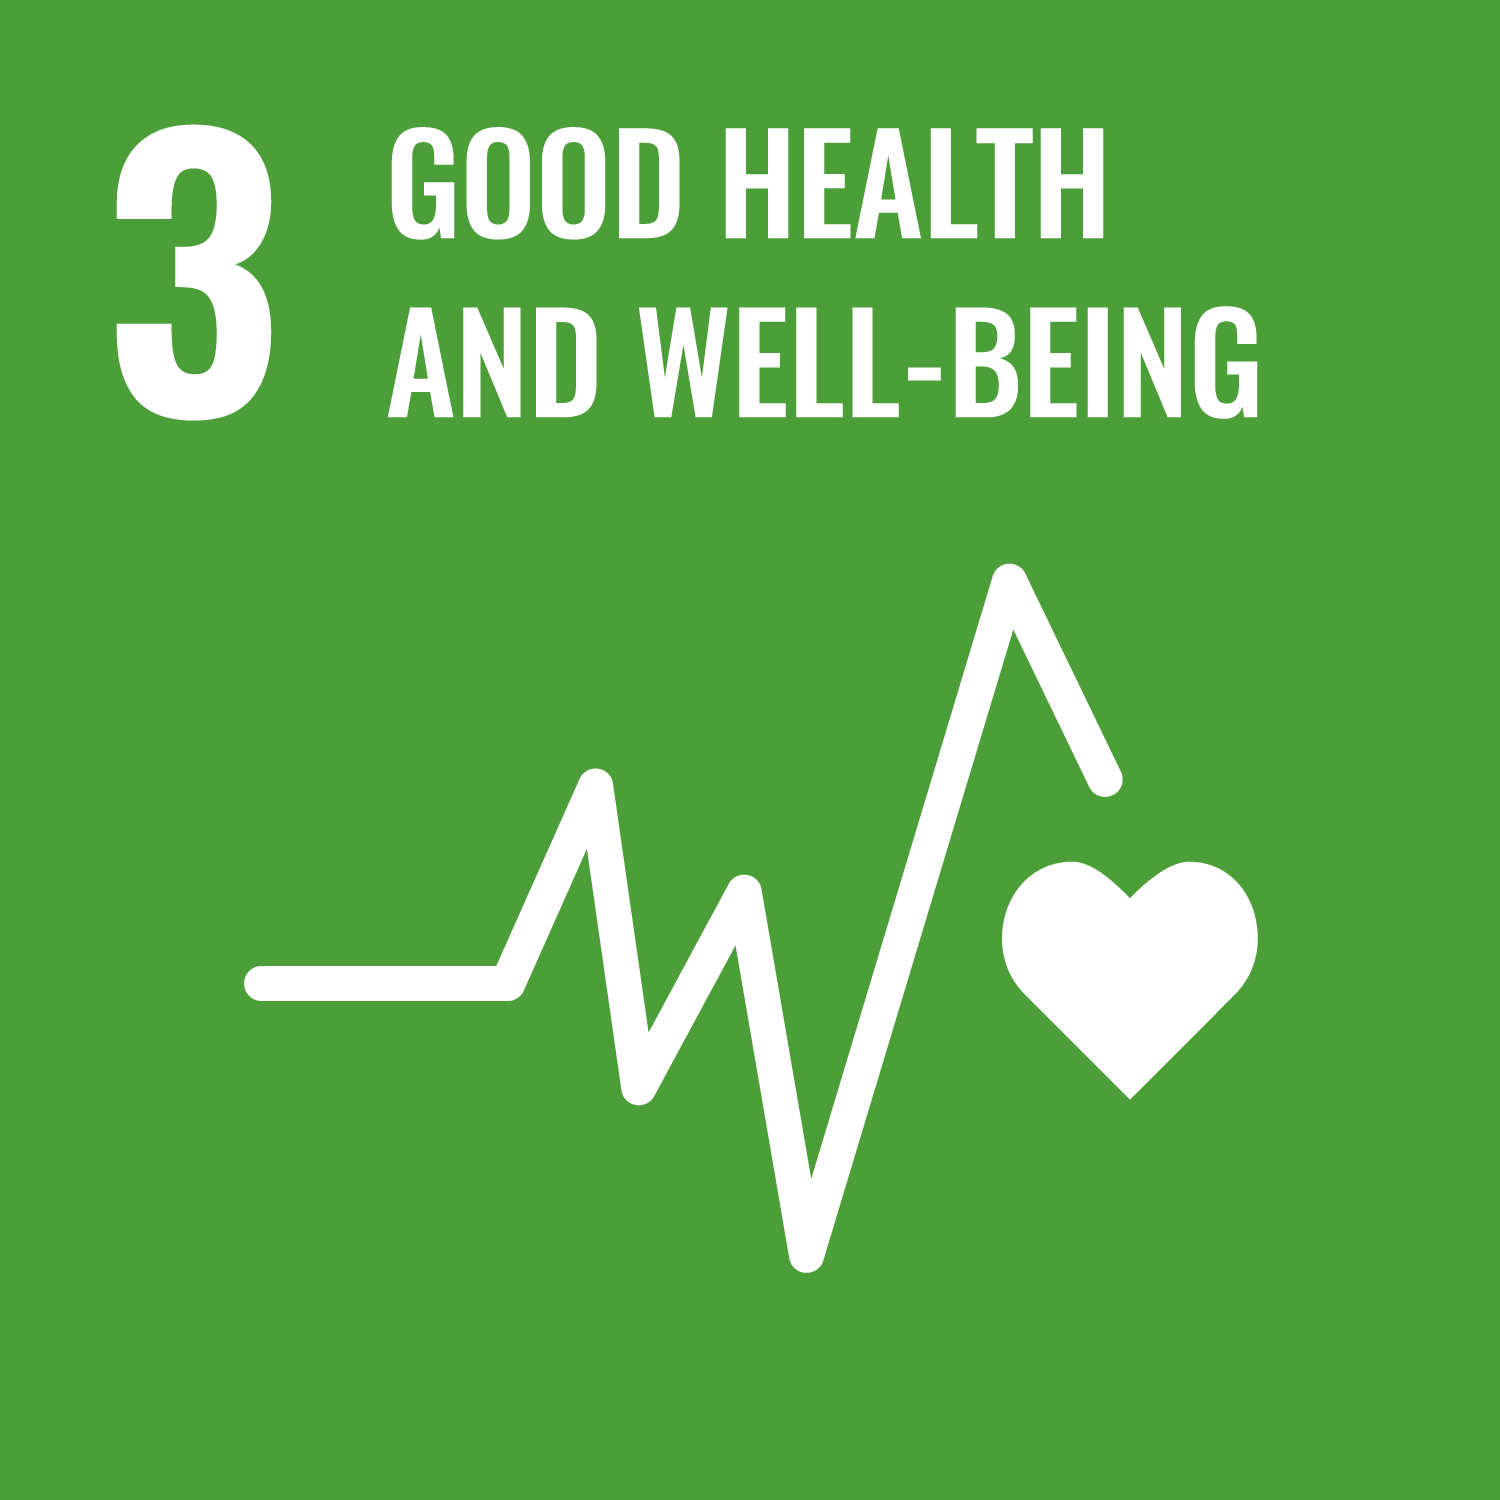 03. Good health and well-being